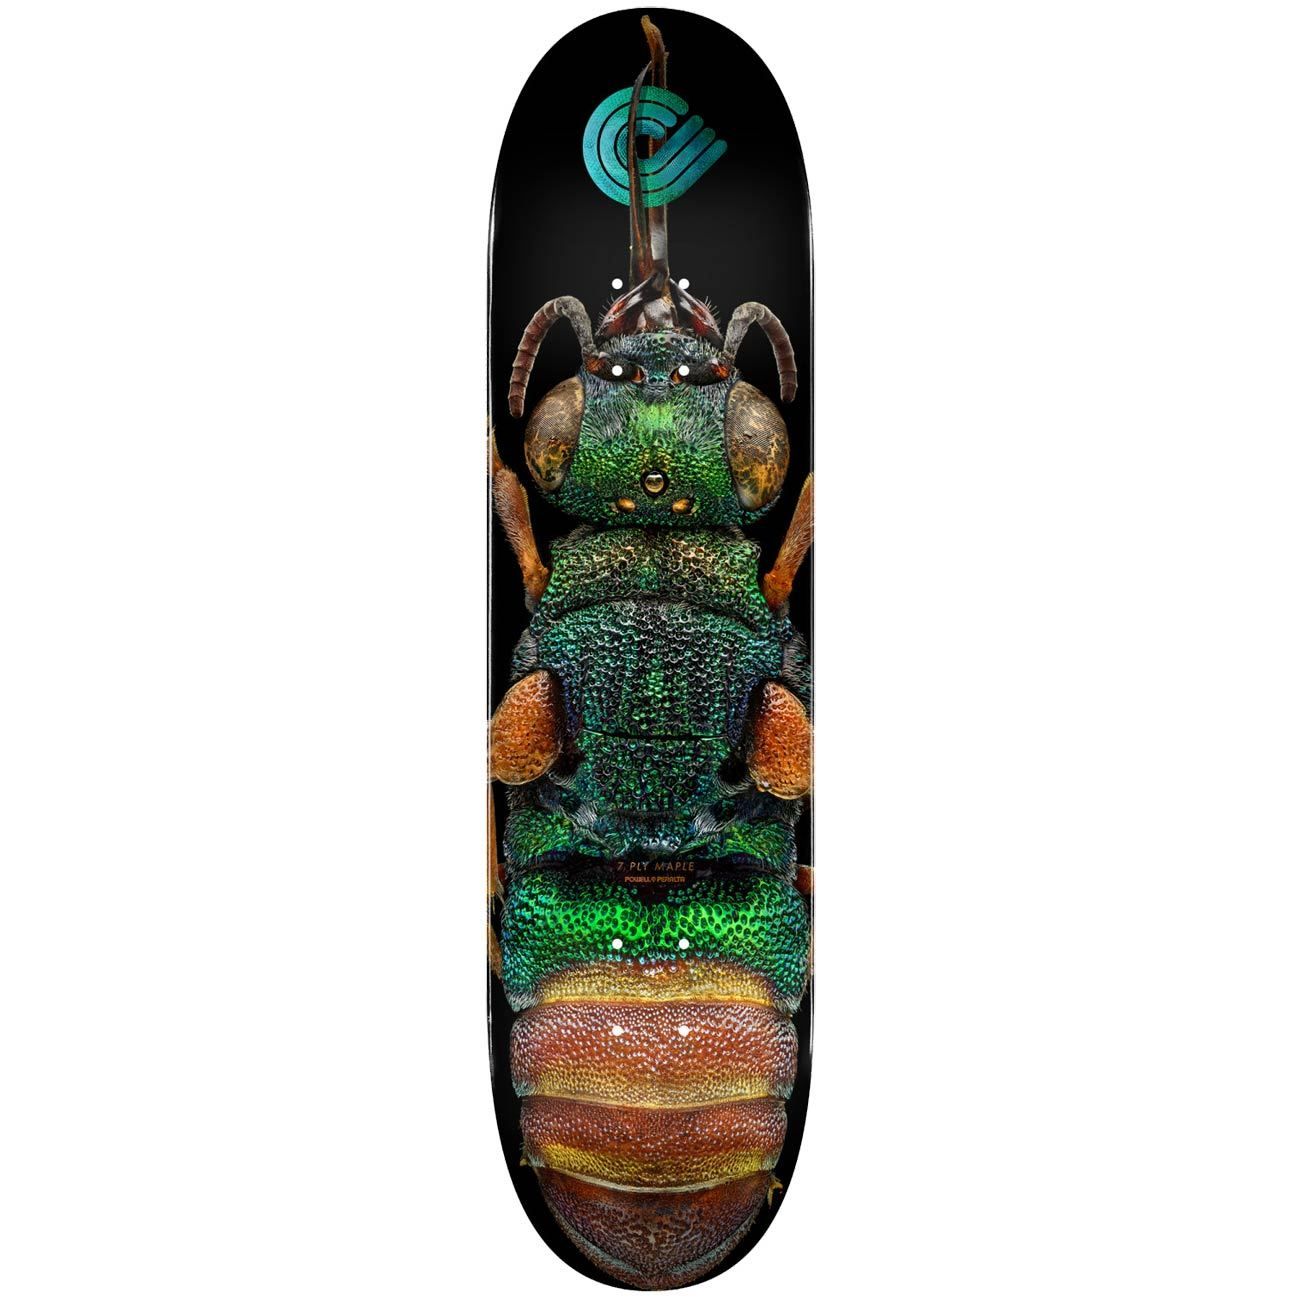 [SP21-PP-DECK-011-8.5] POWELL PERALTA RUBY TAILED WASP 8.5 DECK POWELL